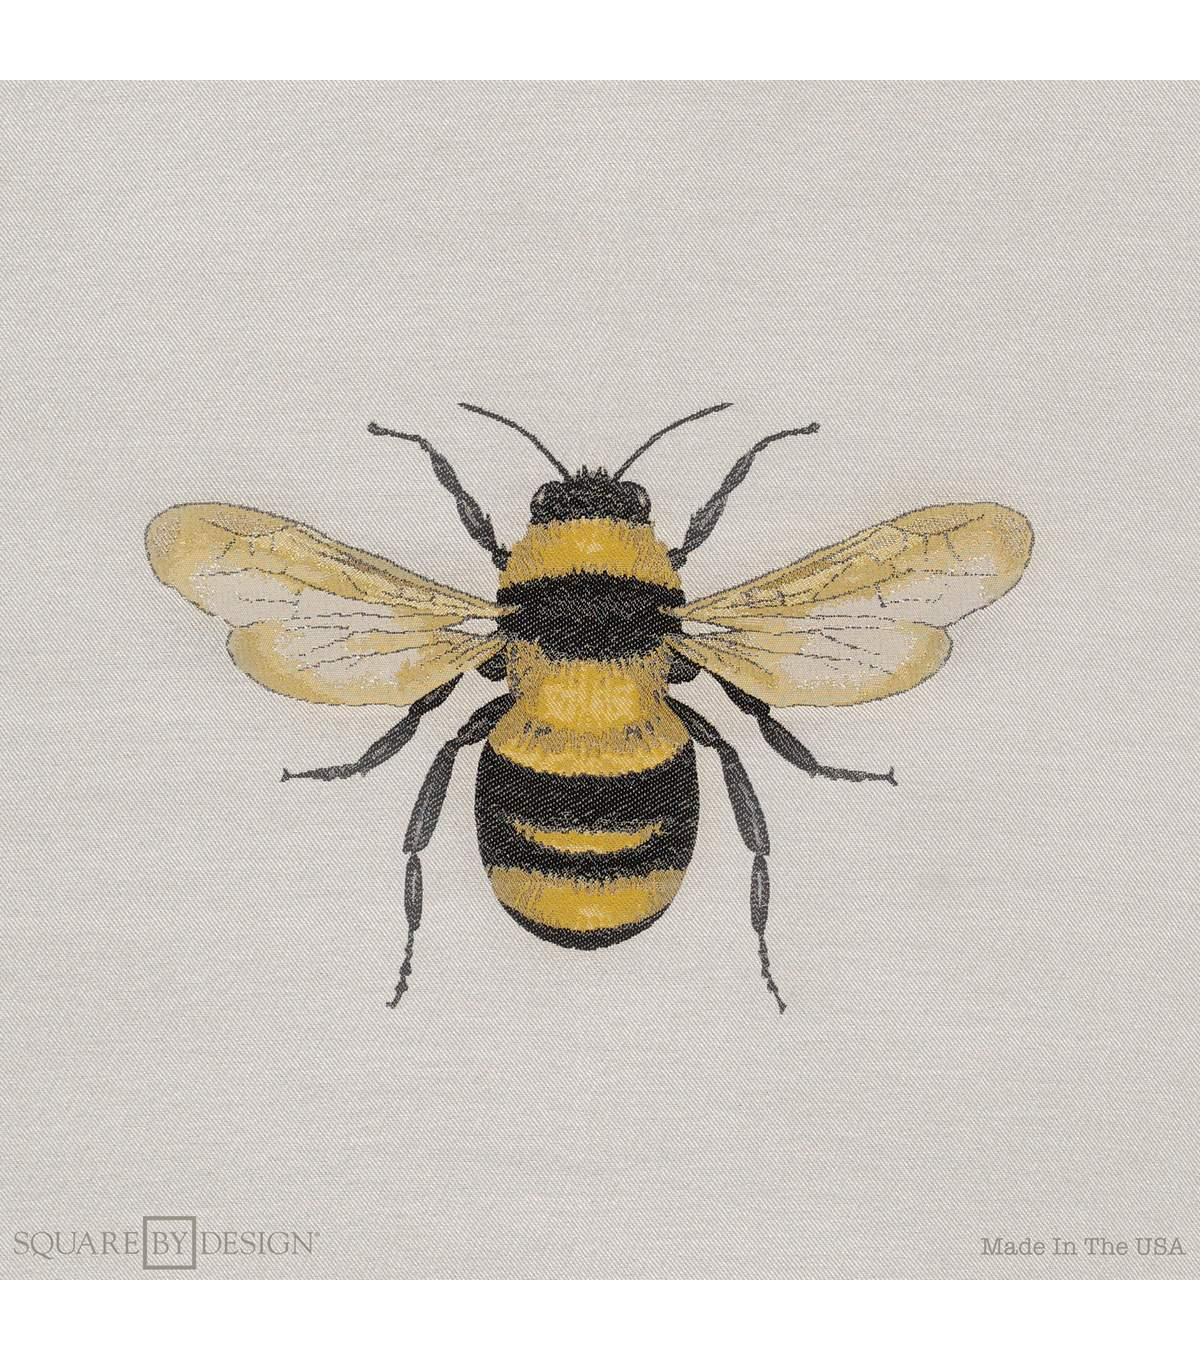 Bumble Bee Embroidery Pattern Square Design Woven Fabric 25 Bumble Bee